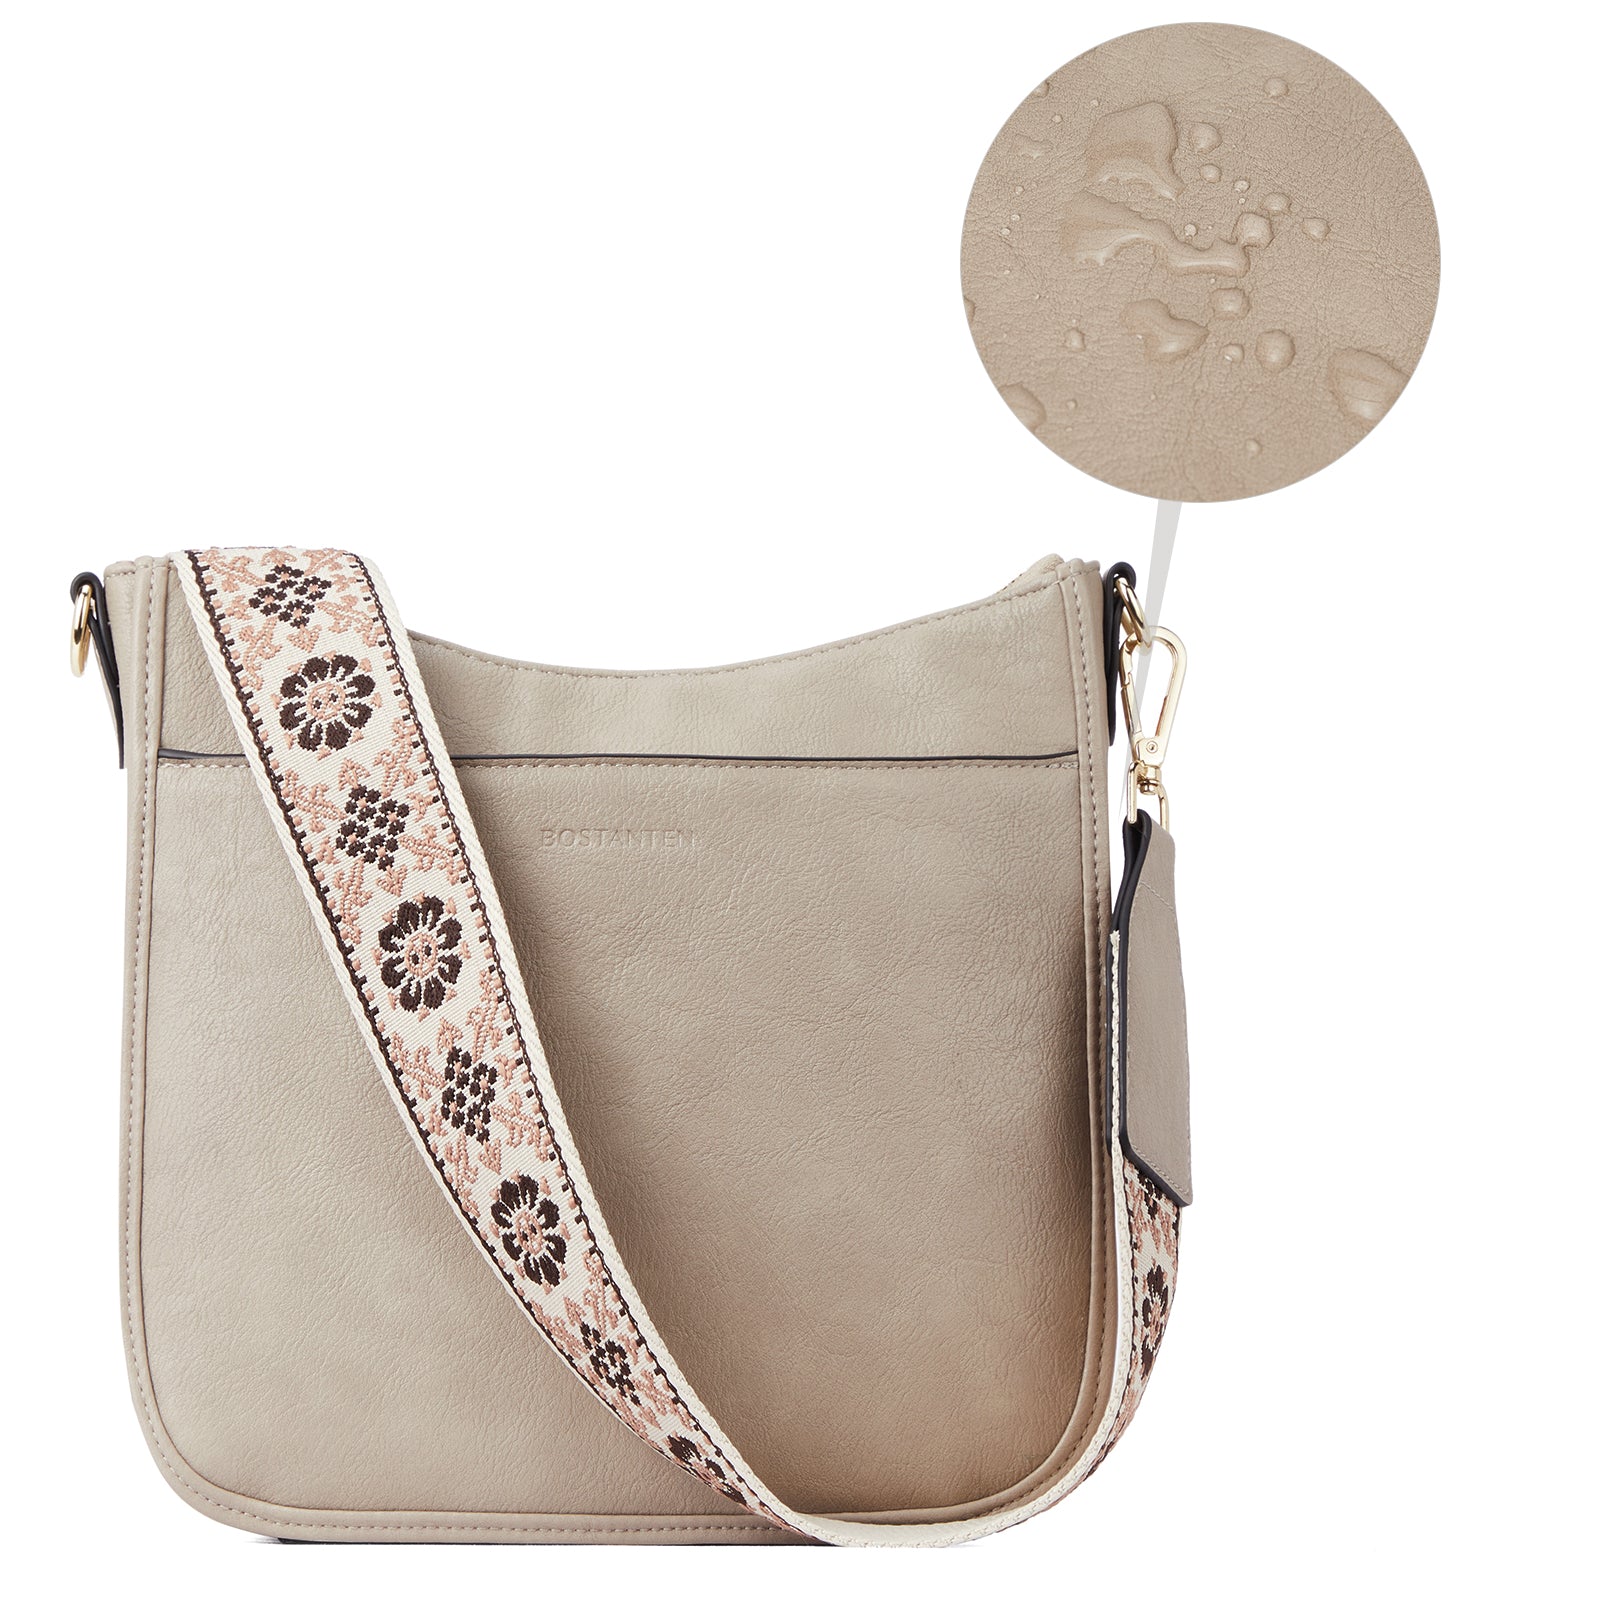 Buy Vegan Faux Crosshatch Leather Crossbody Bag with Flap Pocket (Tan) at  Amazon.in